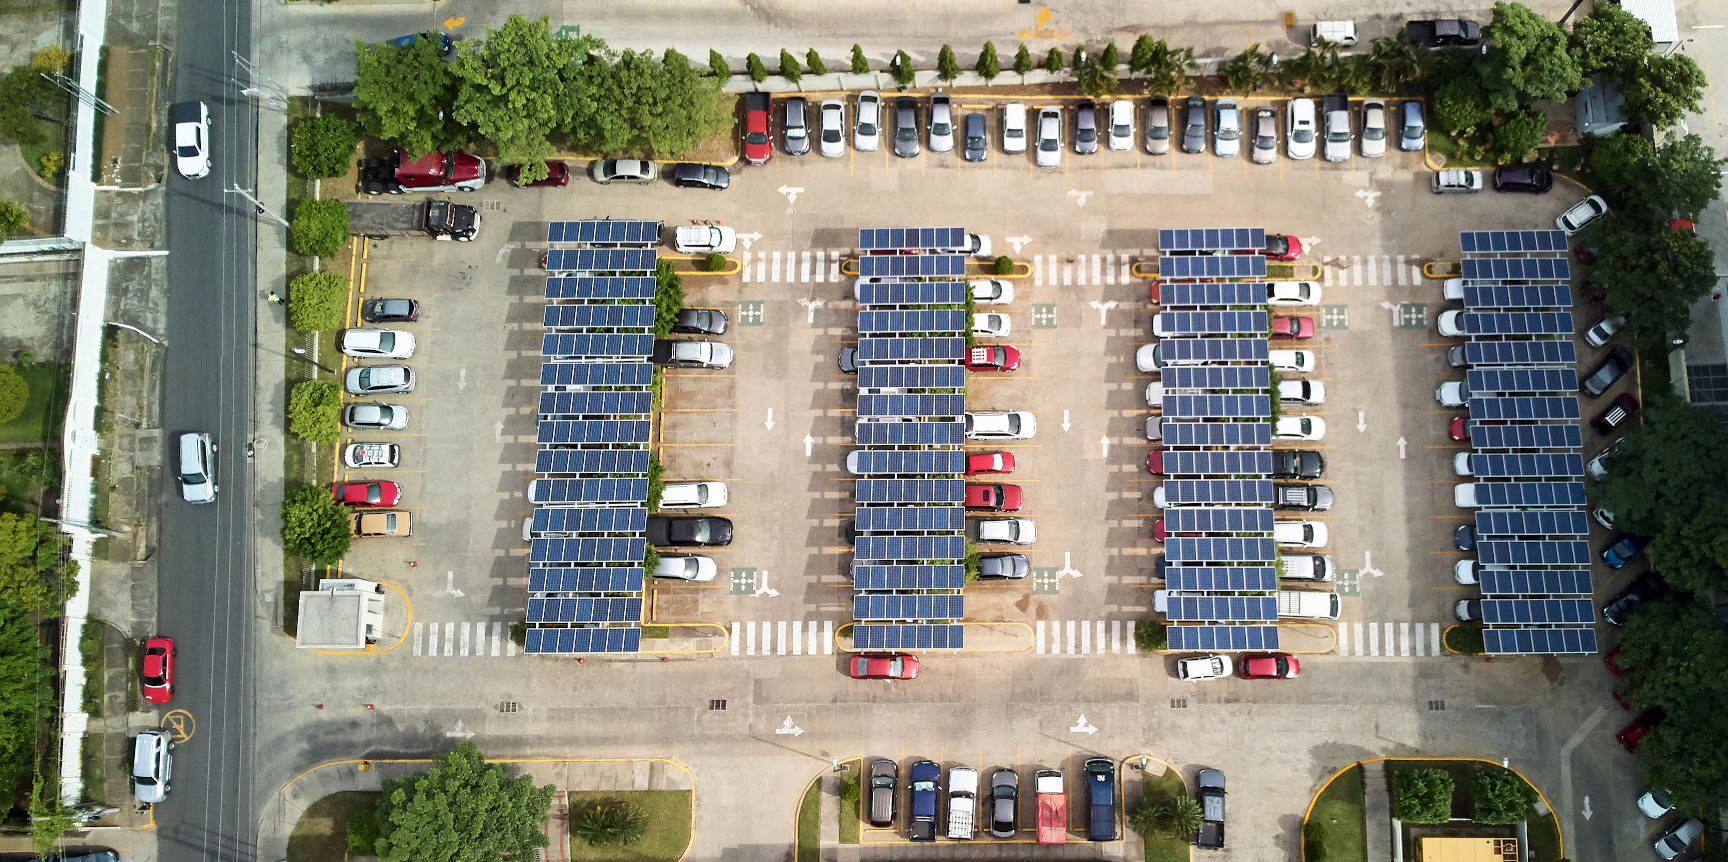 Enlarged view: Parking lot with solar roofs